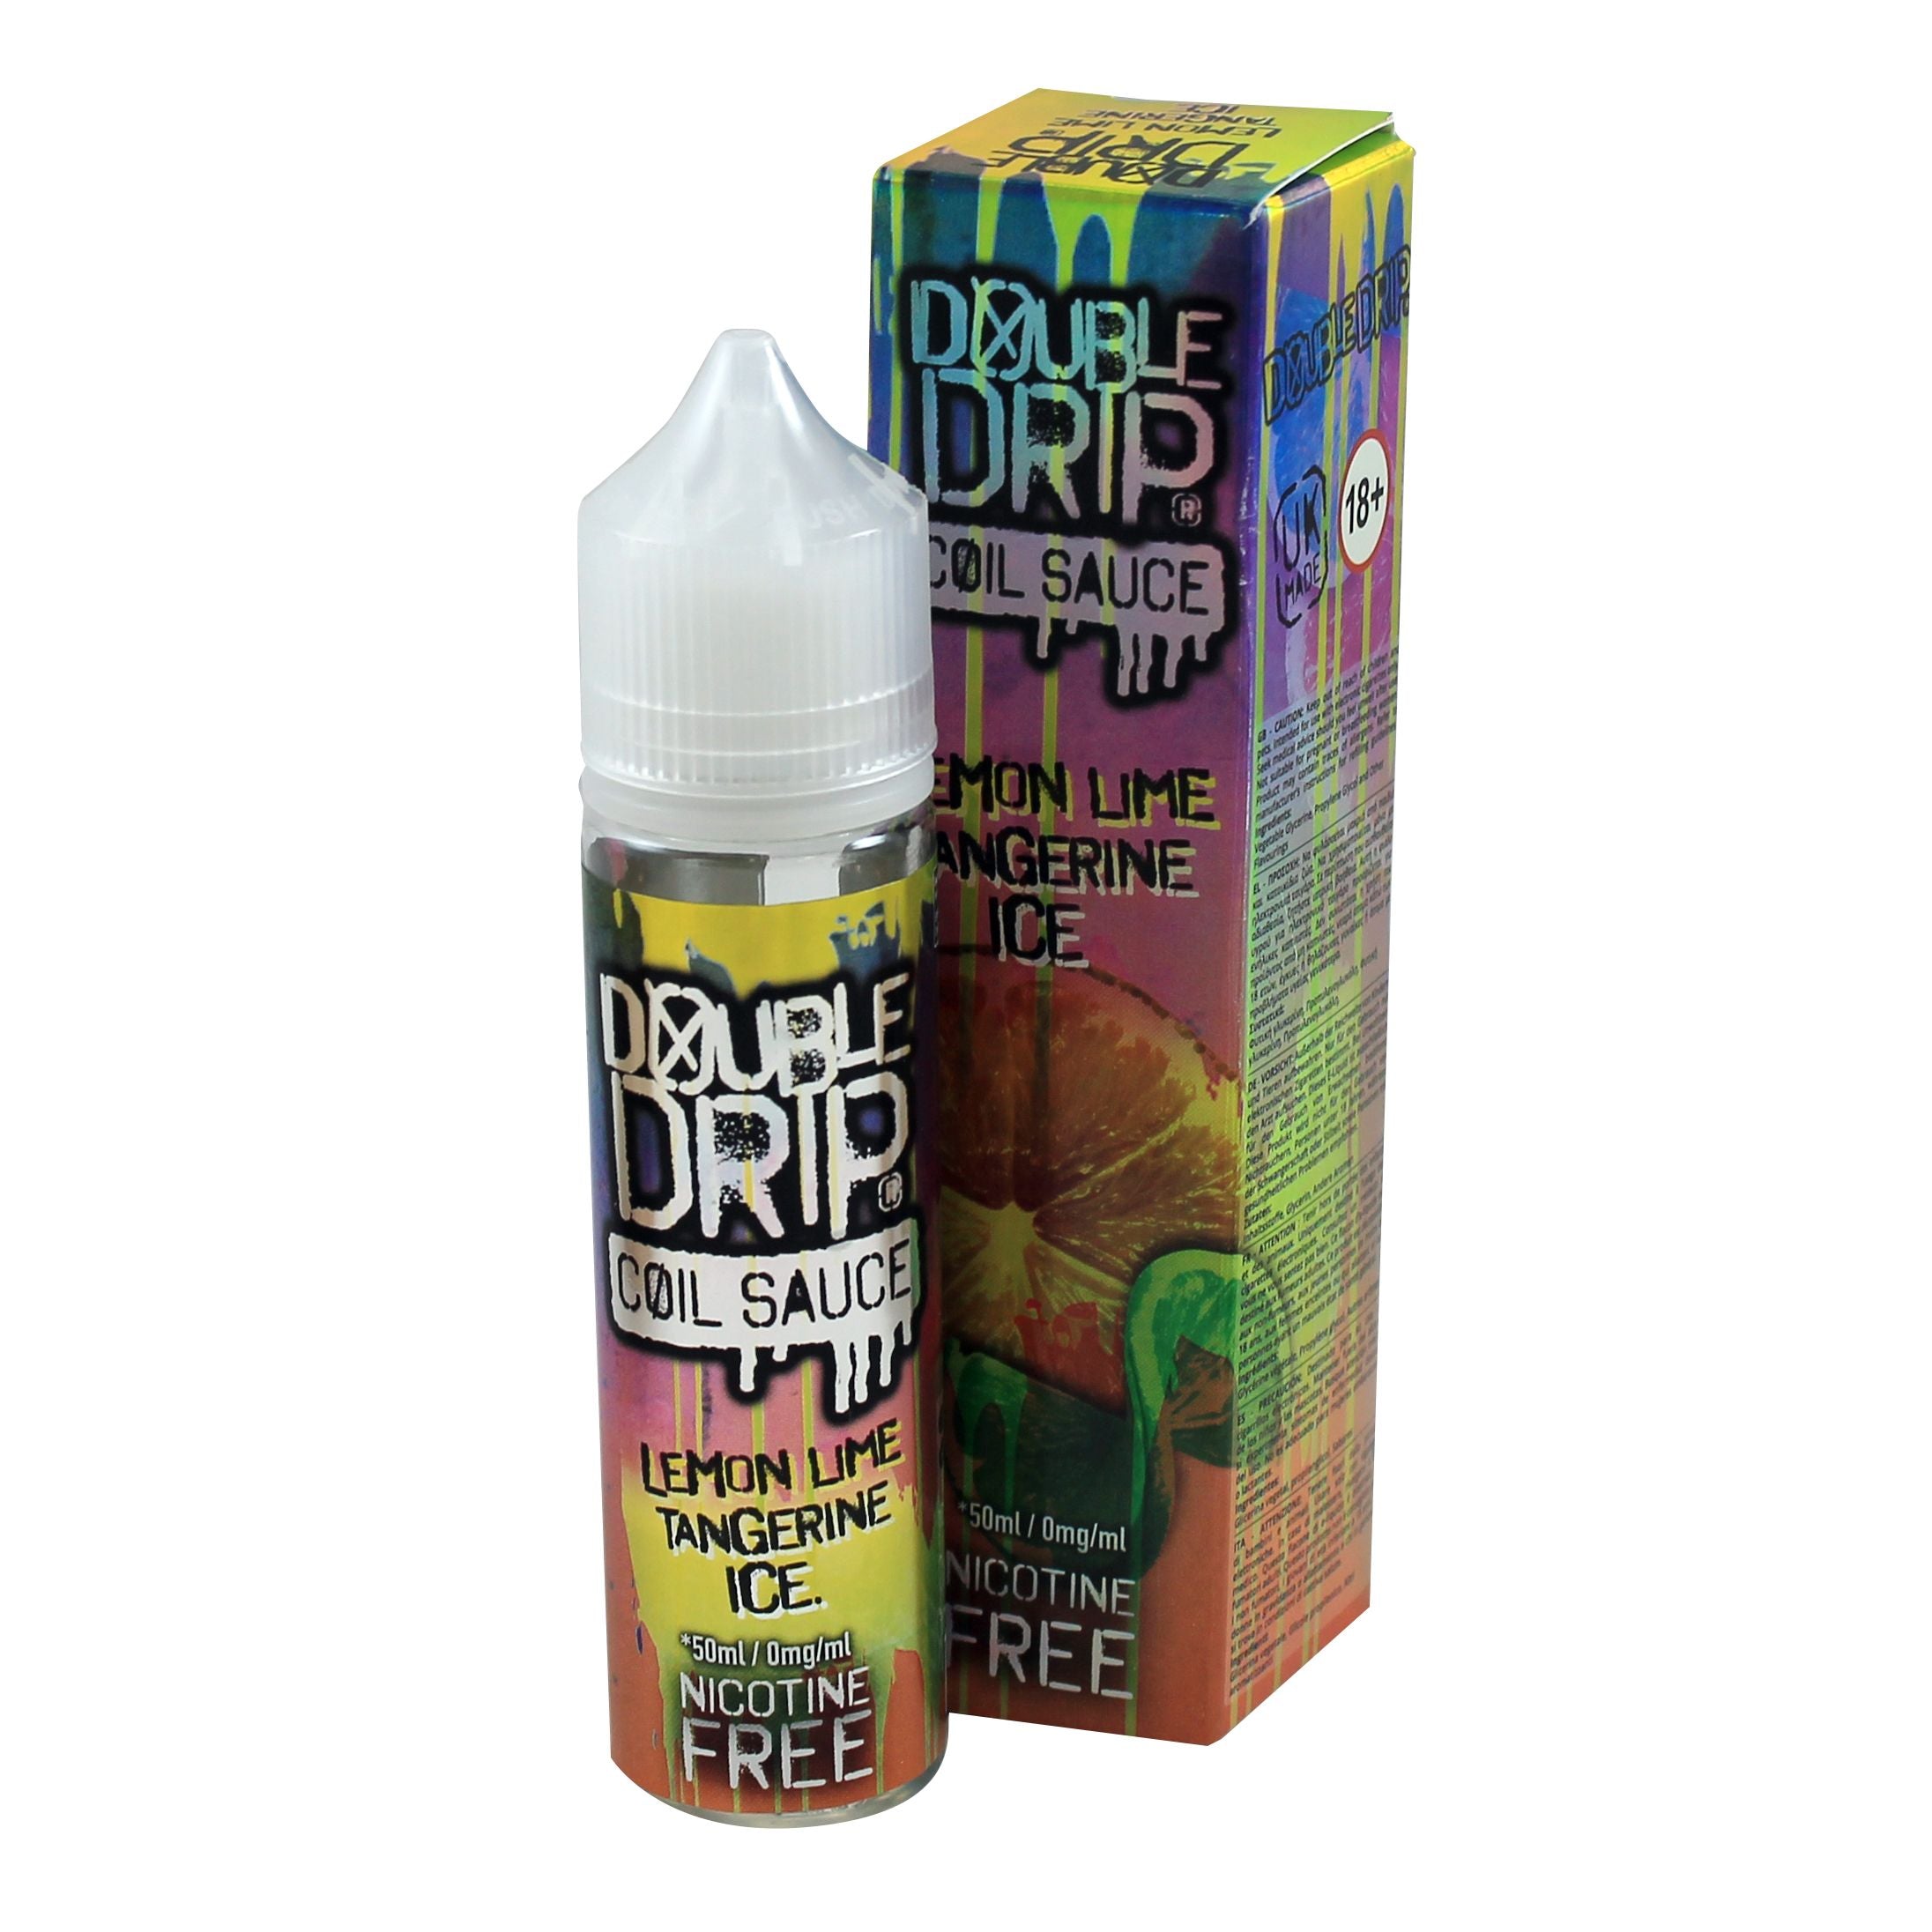 Double Drip Lemon Lime Tangerine Ice 50ml Short Fill - 0mg Out Of Date 07-10-2021